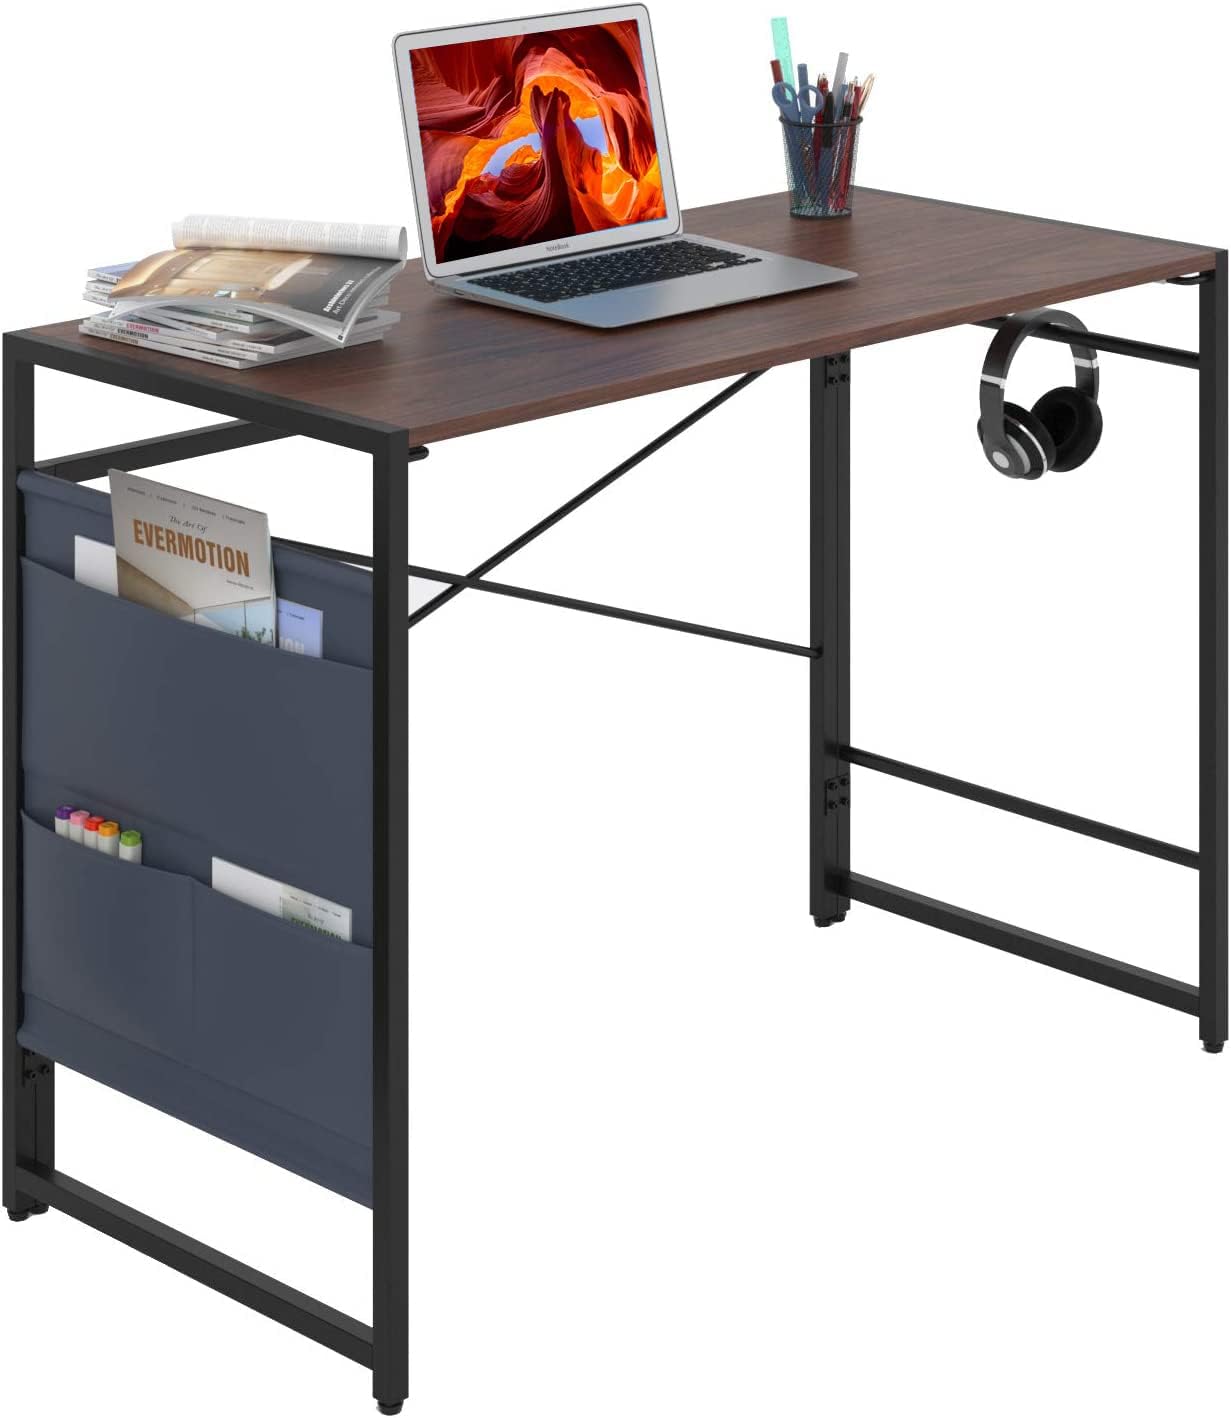 YOMT Foldable Desks for Small Spaces,Small Folding Writing Computer Desk Table with Storage Bag,Portable desks for Home Office,Brown